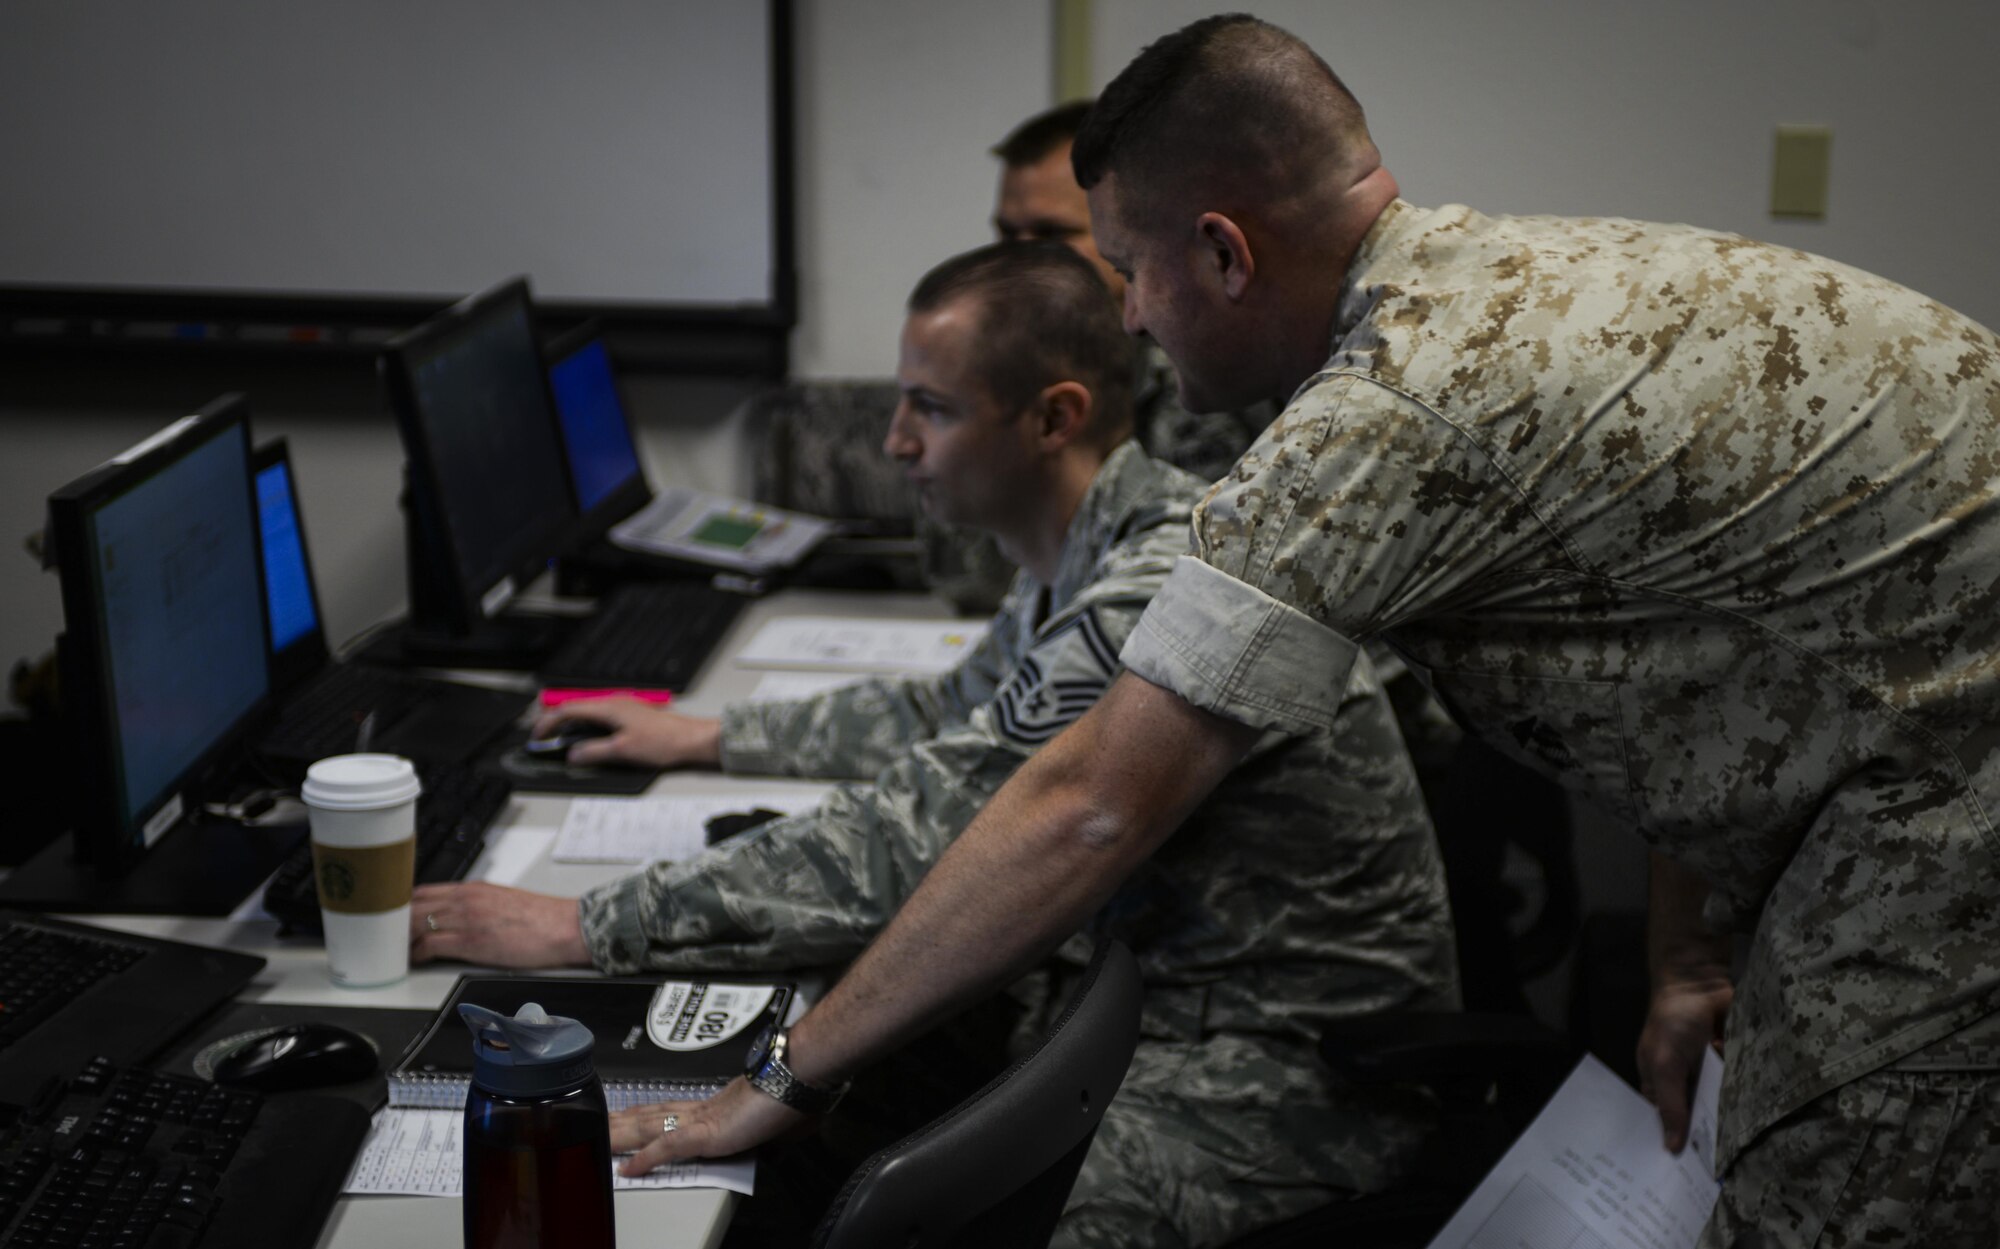 Master Sgt. Thomas Moore prepares for a presentation with fellow classmates during his final week of the Advanced Maintenance and Munitions Operations School’s Advanced Maintenance Superintendent Course at Nellis Air Force Base, Nev., May 16, 2016. The AMSC takes senior NCOs and pushes them past what they would normally have to handle while at home station by forcing them to also manage maintenance in a combat environment. (U.S. Air Force photo by Airman 1st Class Kevin Tanenbaum)